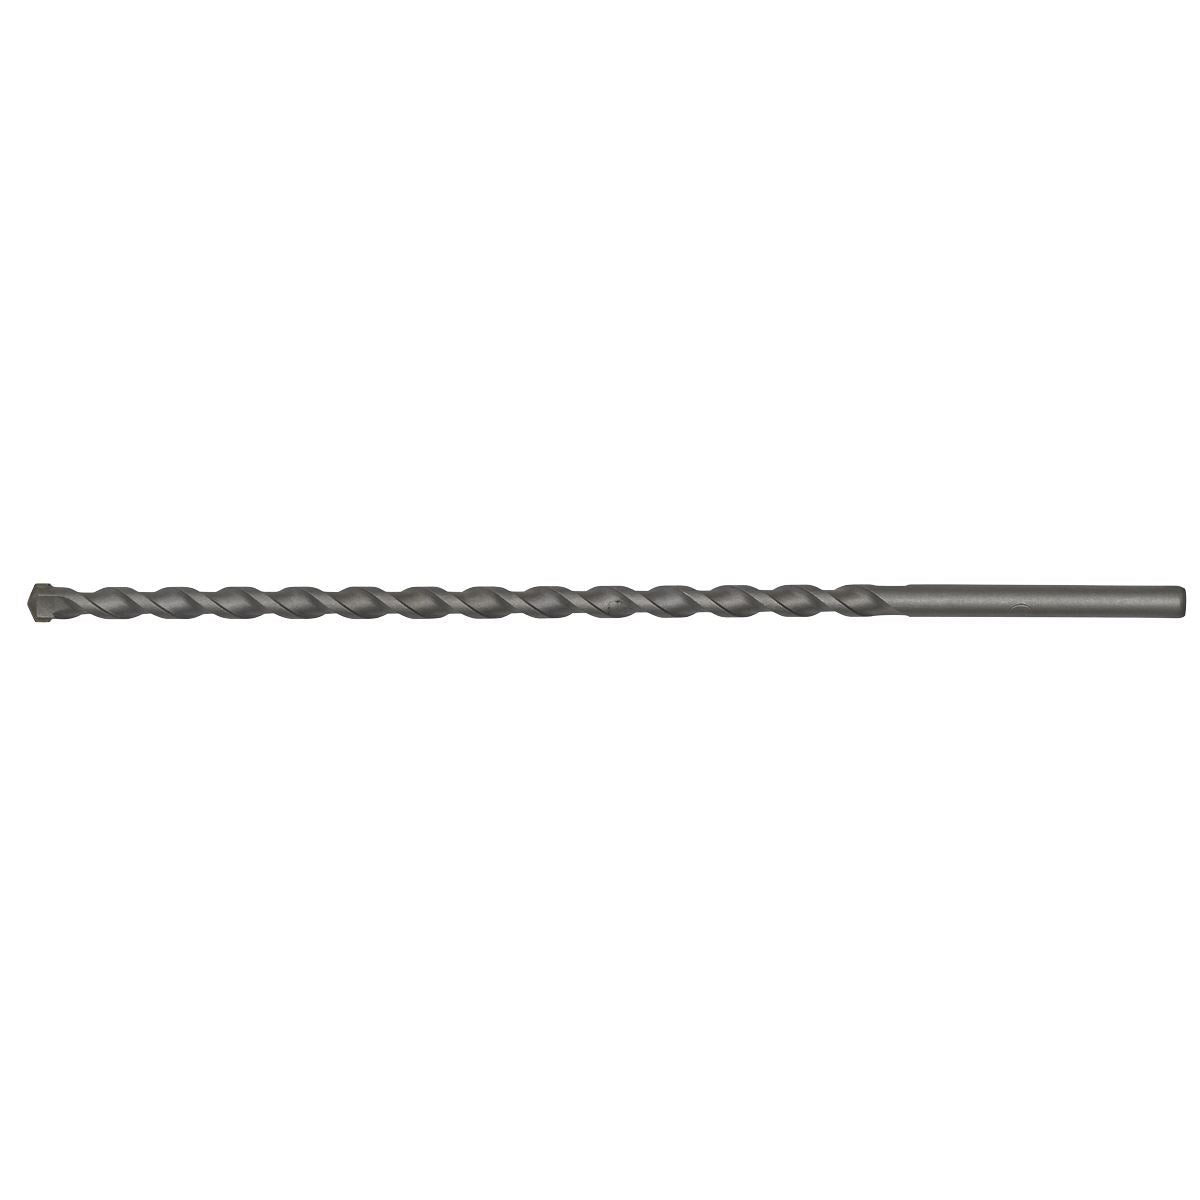 Worksafe by Sealey Straight Shank Rotary Impact Drill Bit Ø10 x 300mm